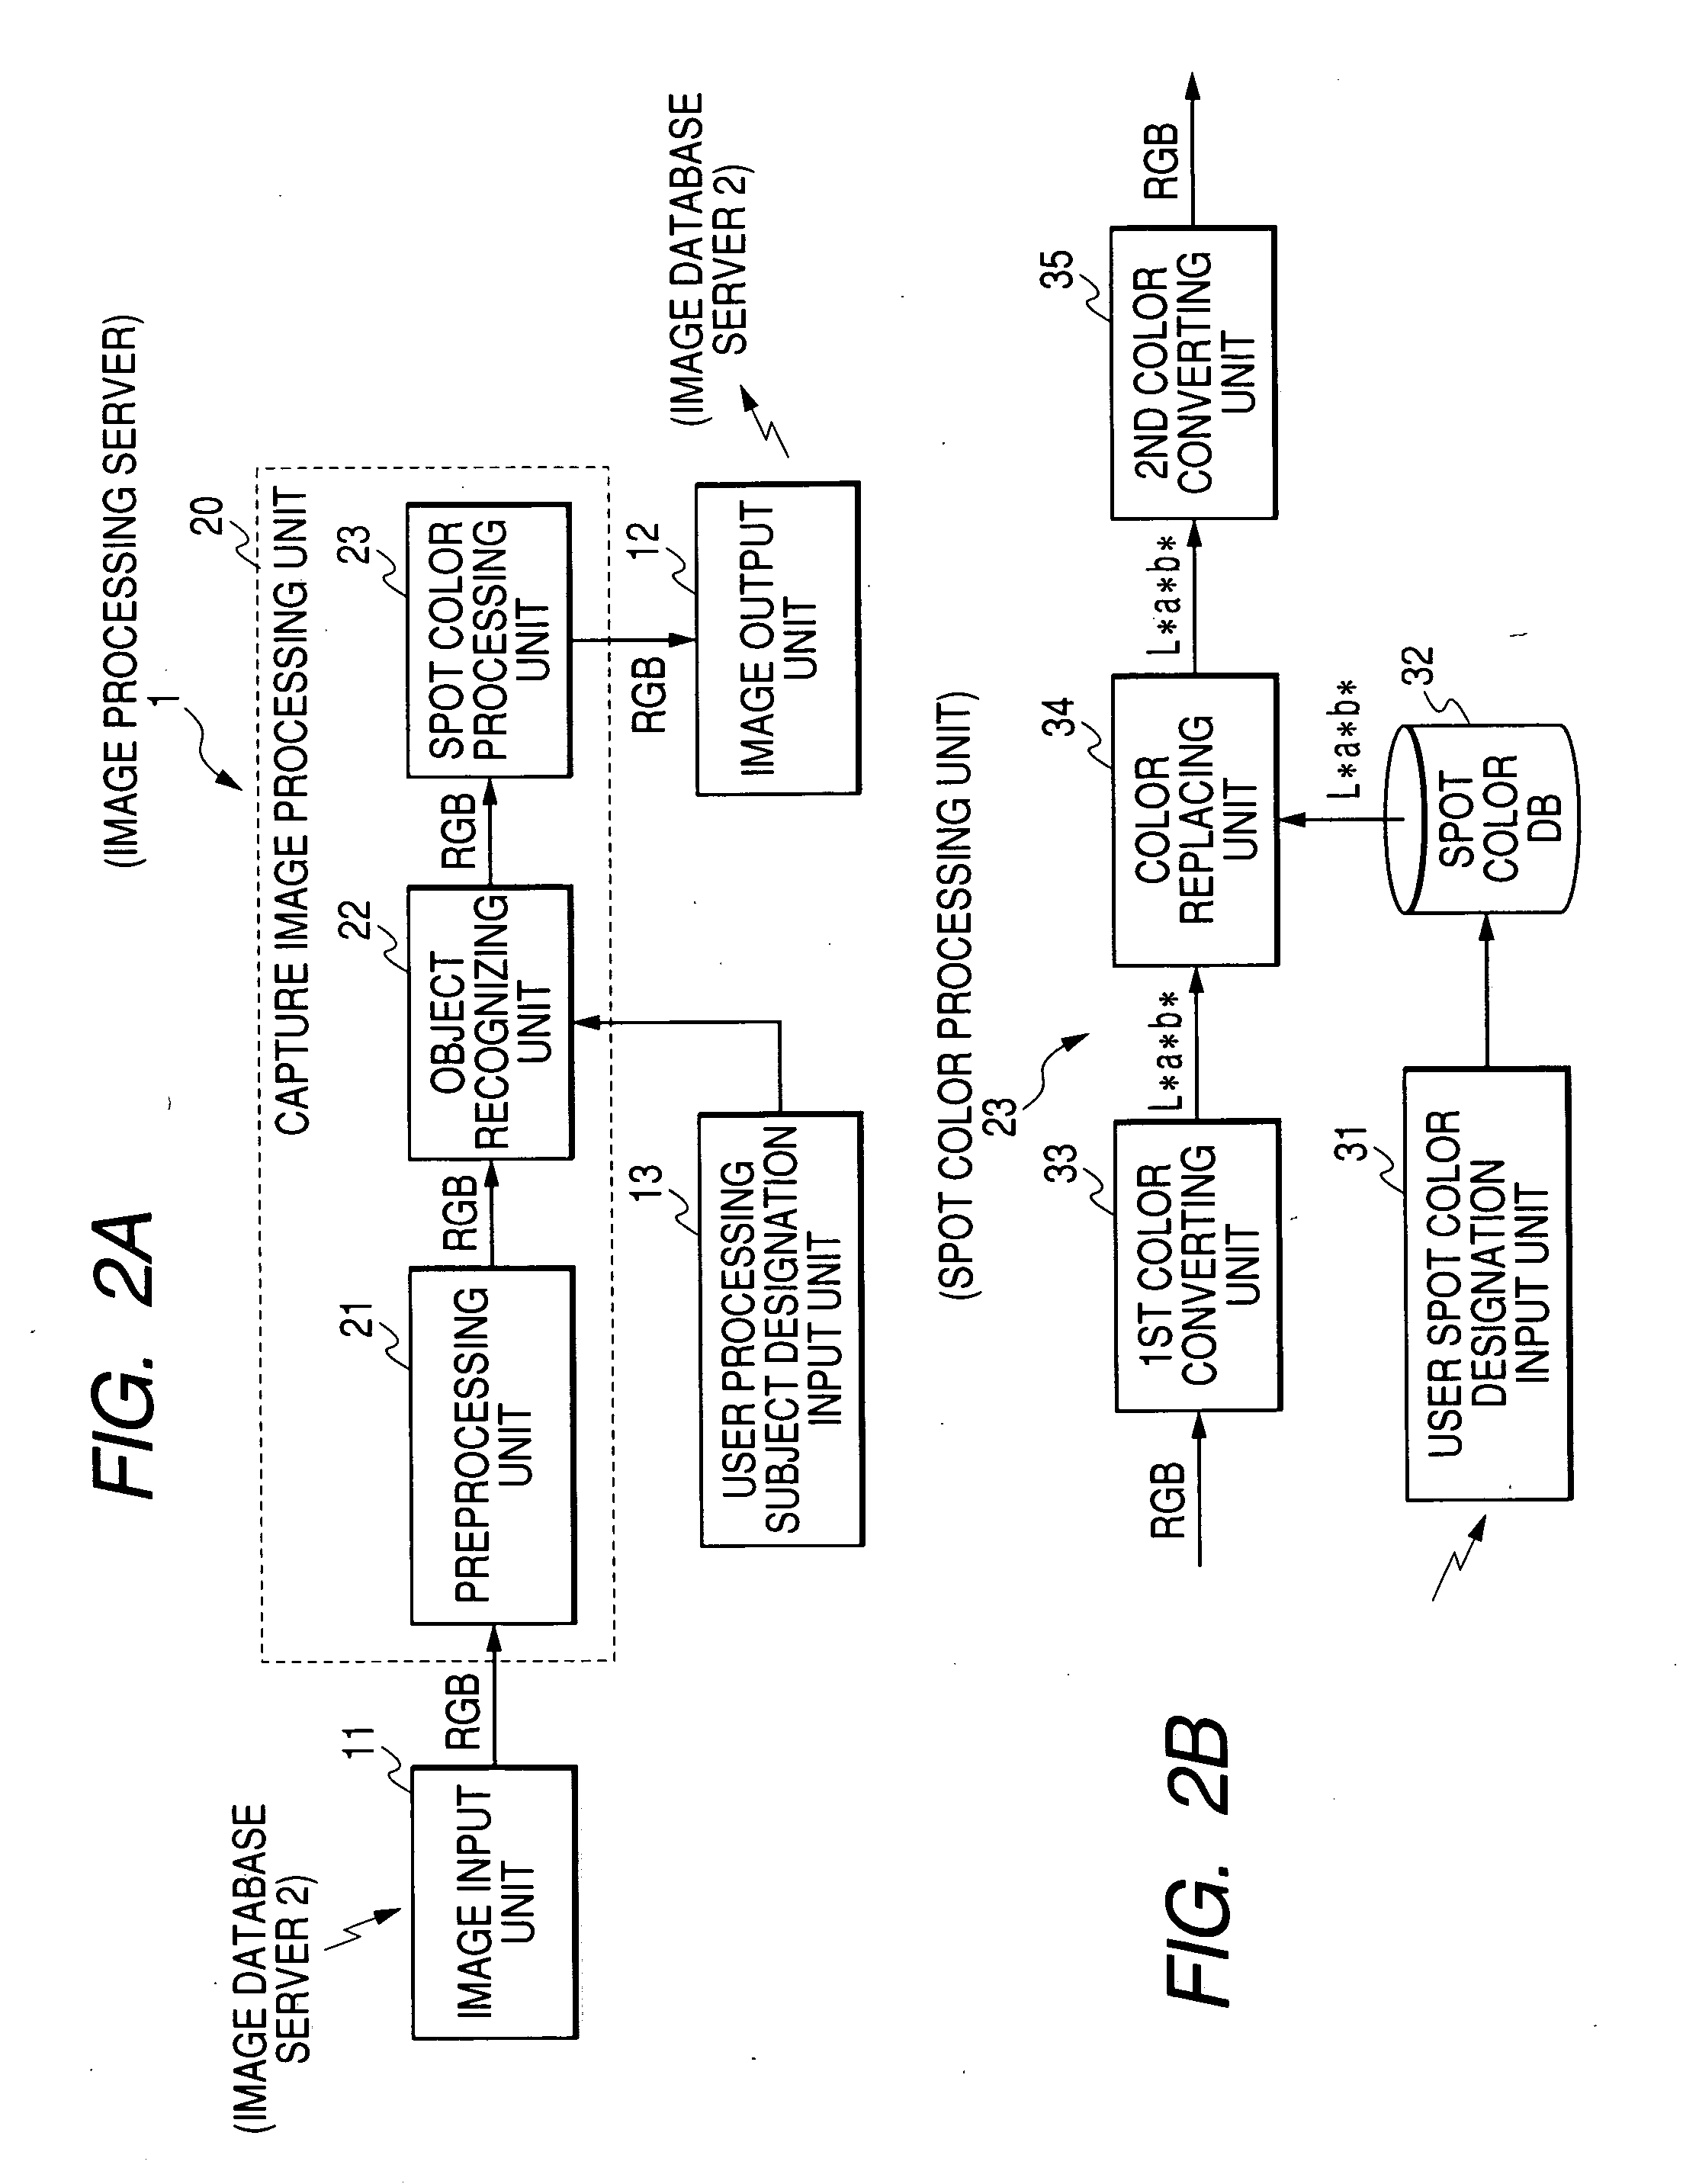 Image processing apparatus, image processing method and program product therefor